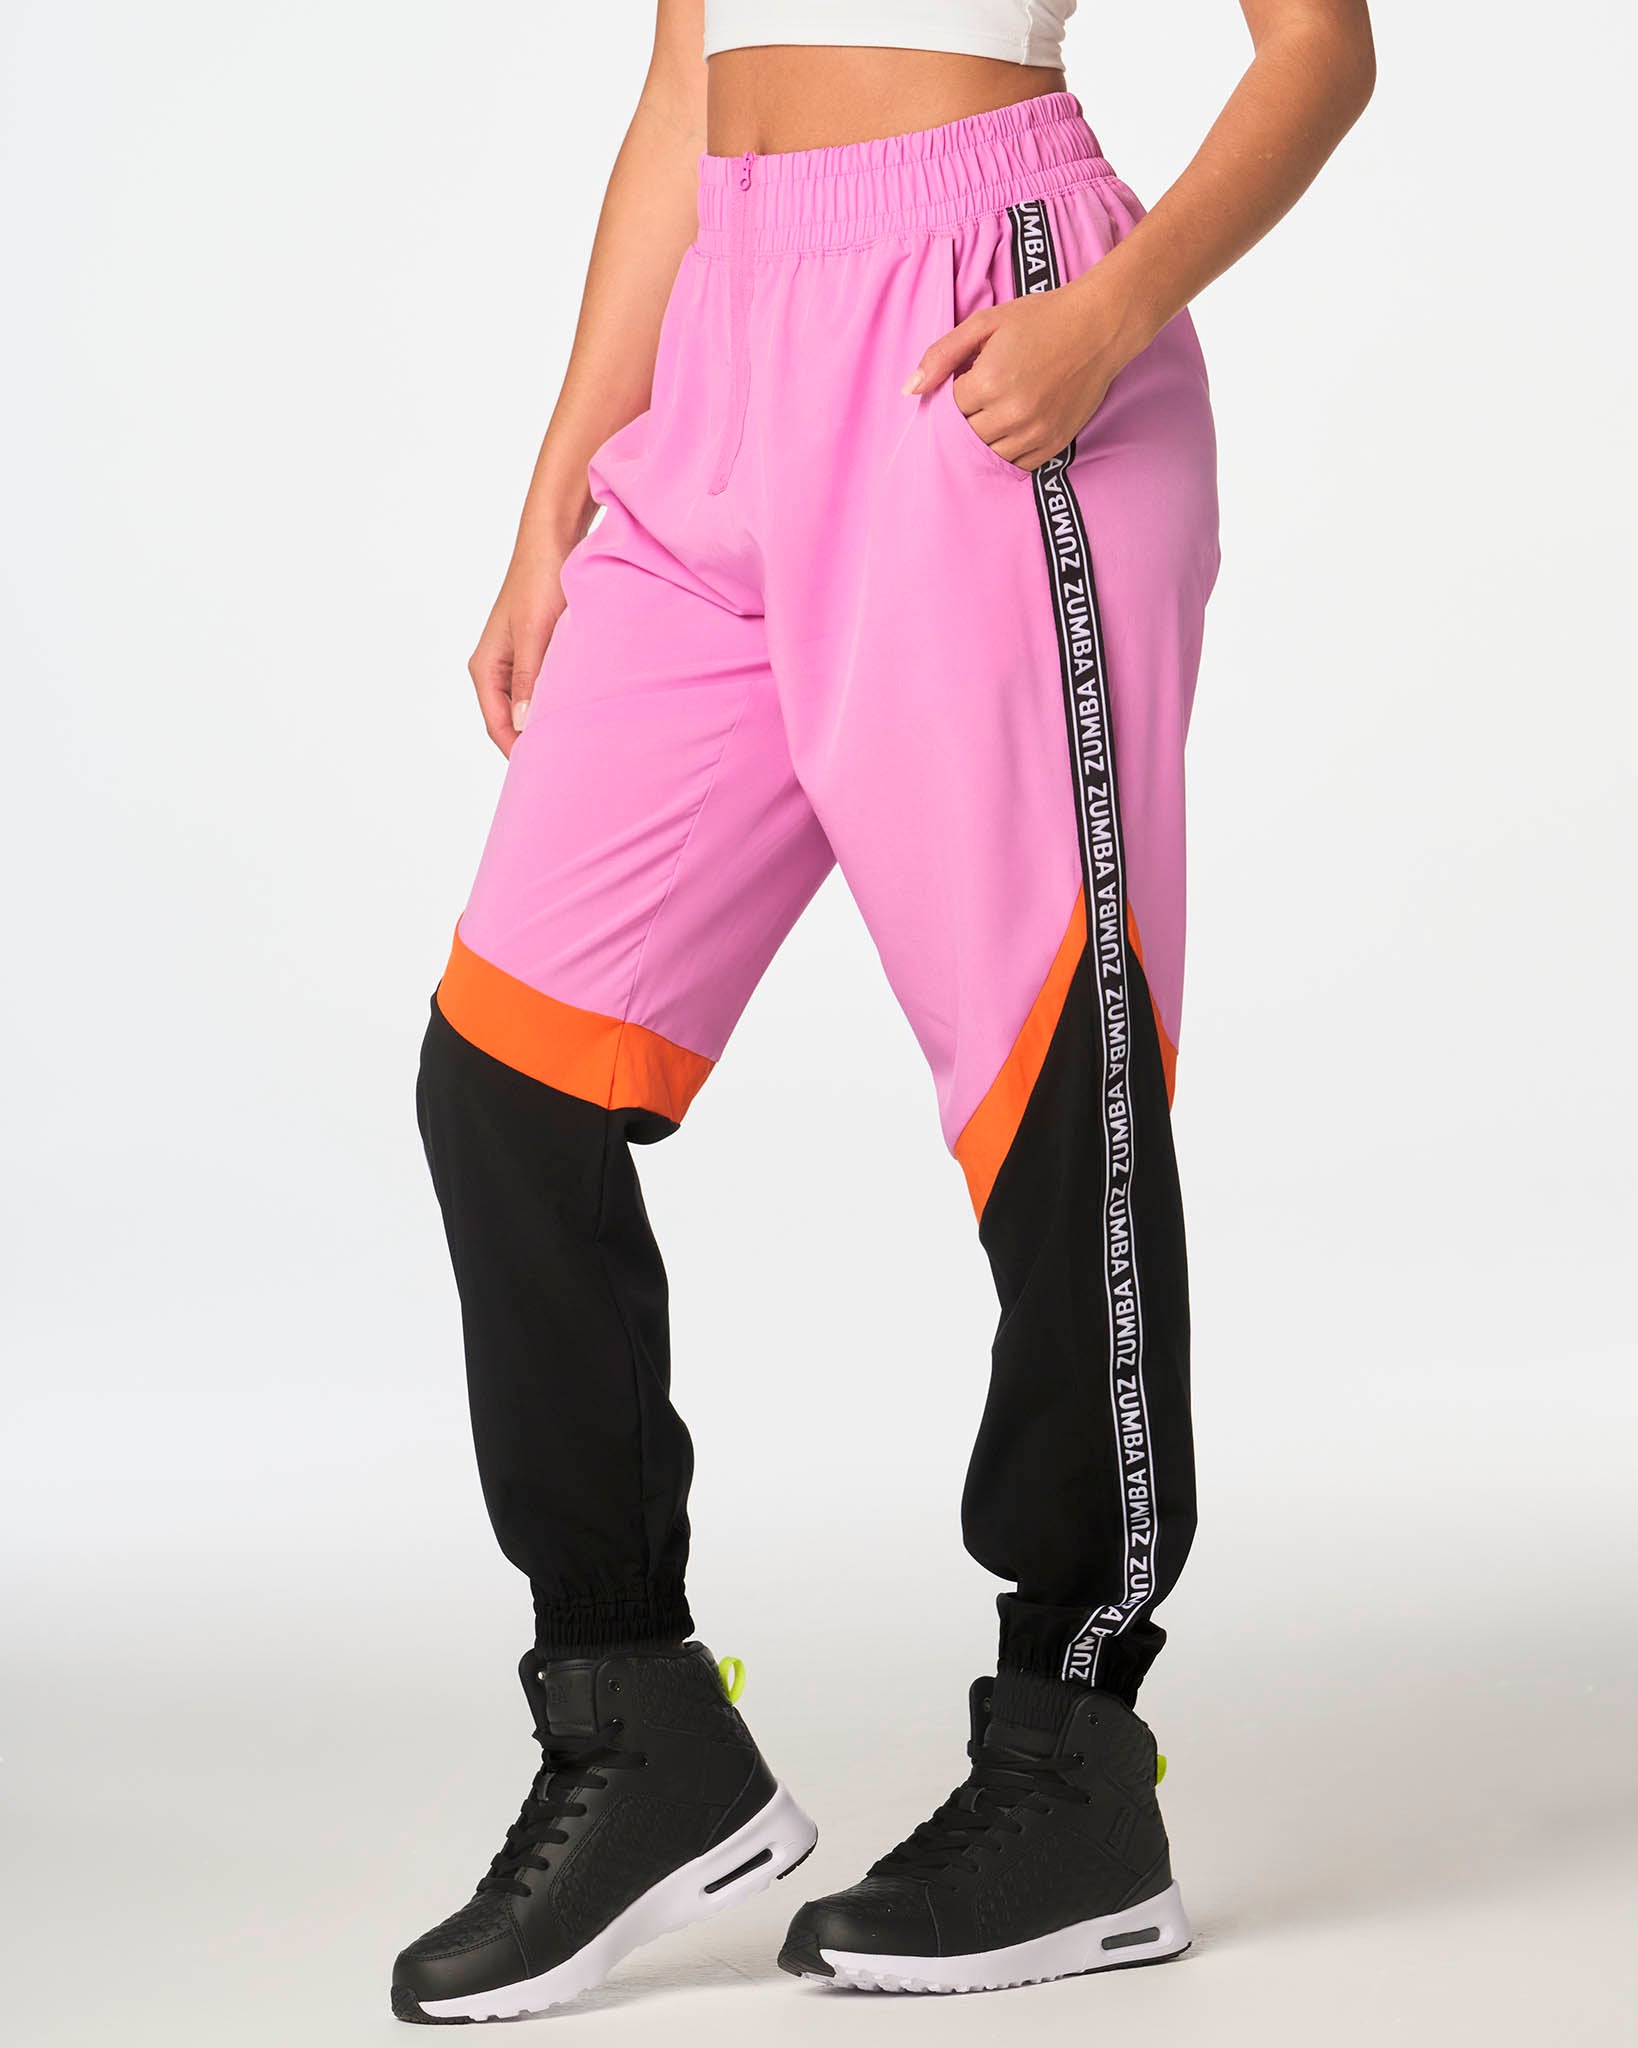 SUMMER SPECIAL womens zumba combat trousers pants beetroot pink Large size  12-14